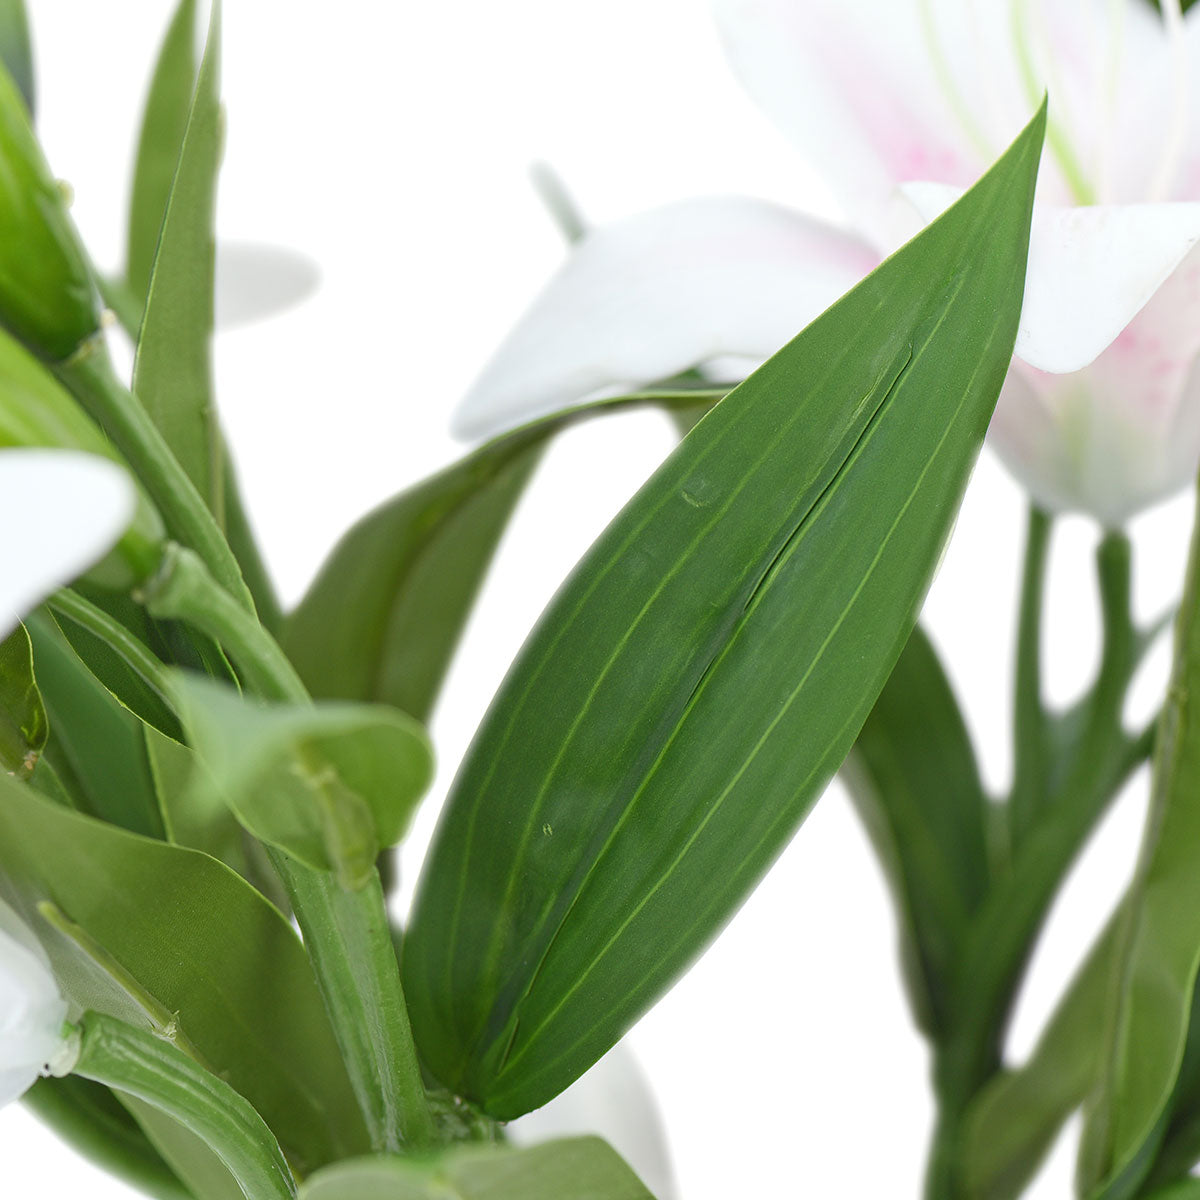 Real Touch White | Light Pink Lilies Artificial Flower Bouquet 5 Stems